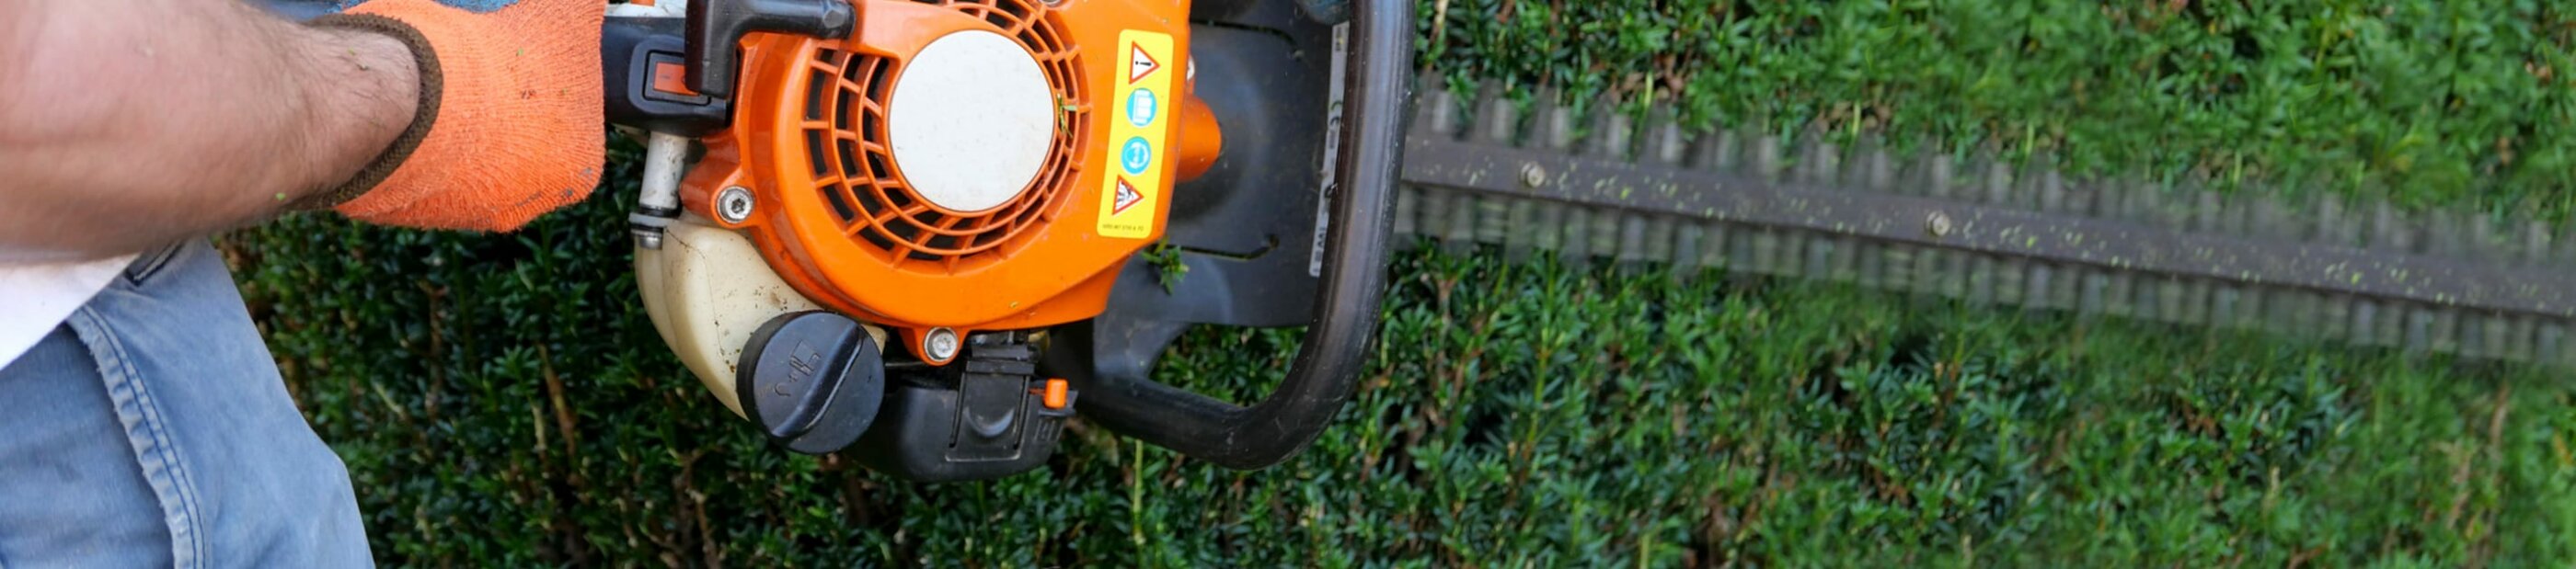 man cutting bush with a hedge trimmer